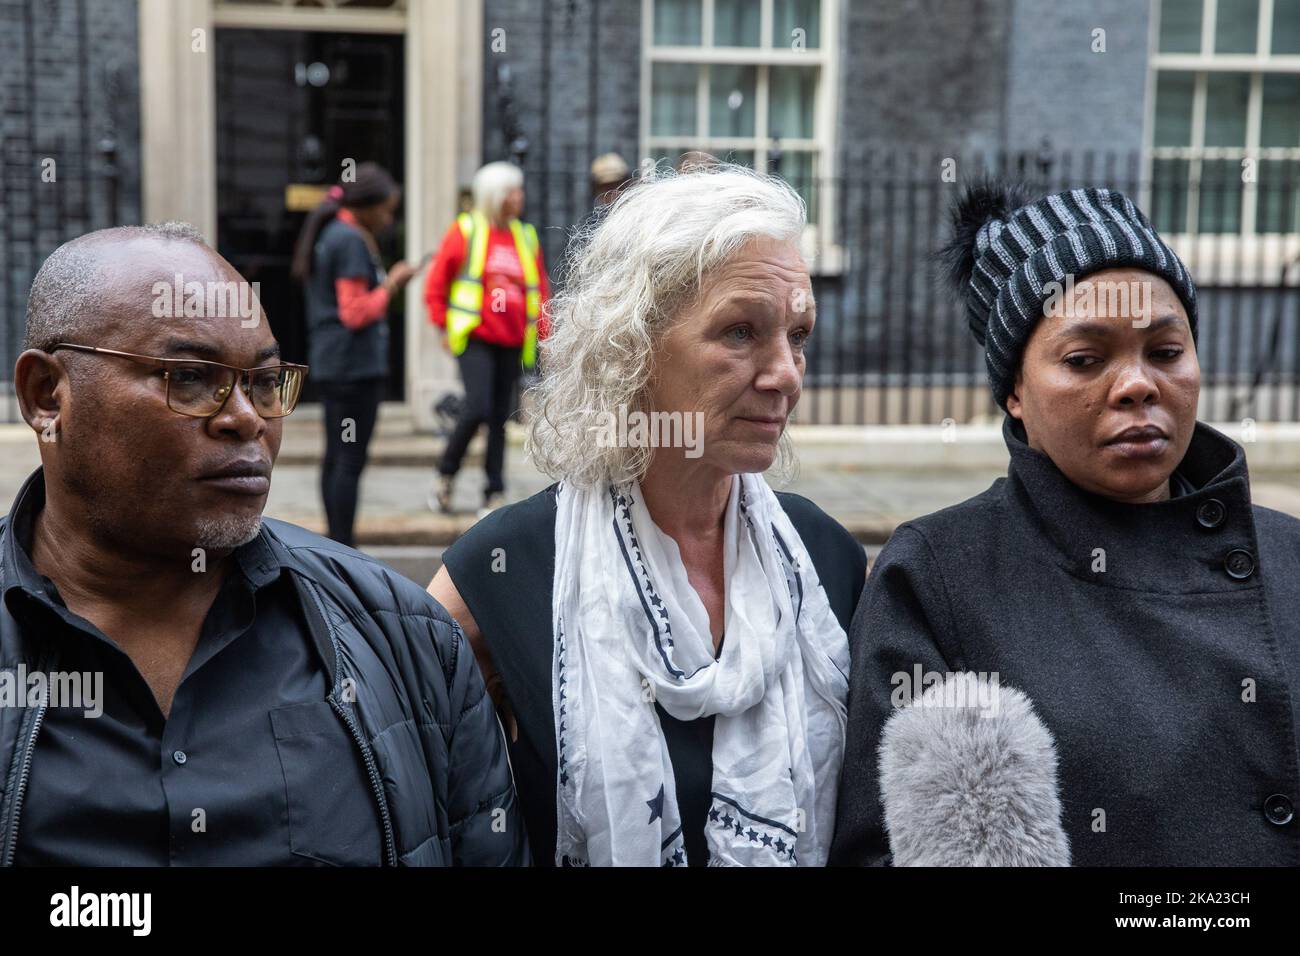 London, UK. 29th October, 2022. Prosper Kaba (l) and Nkama Lumuanganu (r), father and mother of Chris Kaba, and Carole Duggan (c), aunt of Mark Duggan, are interviewed after United Families & Friends Campaign (UFFC) presented letters to 10 Downing Street following their annual procession in remembrance of family members and friends who died in police custody, in prison, in immigration detention or in secure psychiatric hospitals. Chris Kaba, 24, who was not a police suspect, was shot dead by a police firearms officer in a residential road in Streatham on 5 September 2022. There have been 1,838 Stock Photo